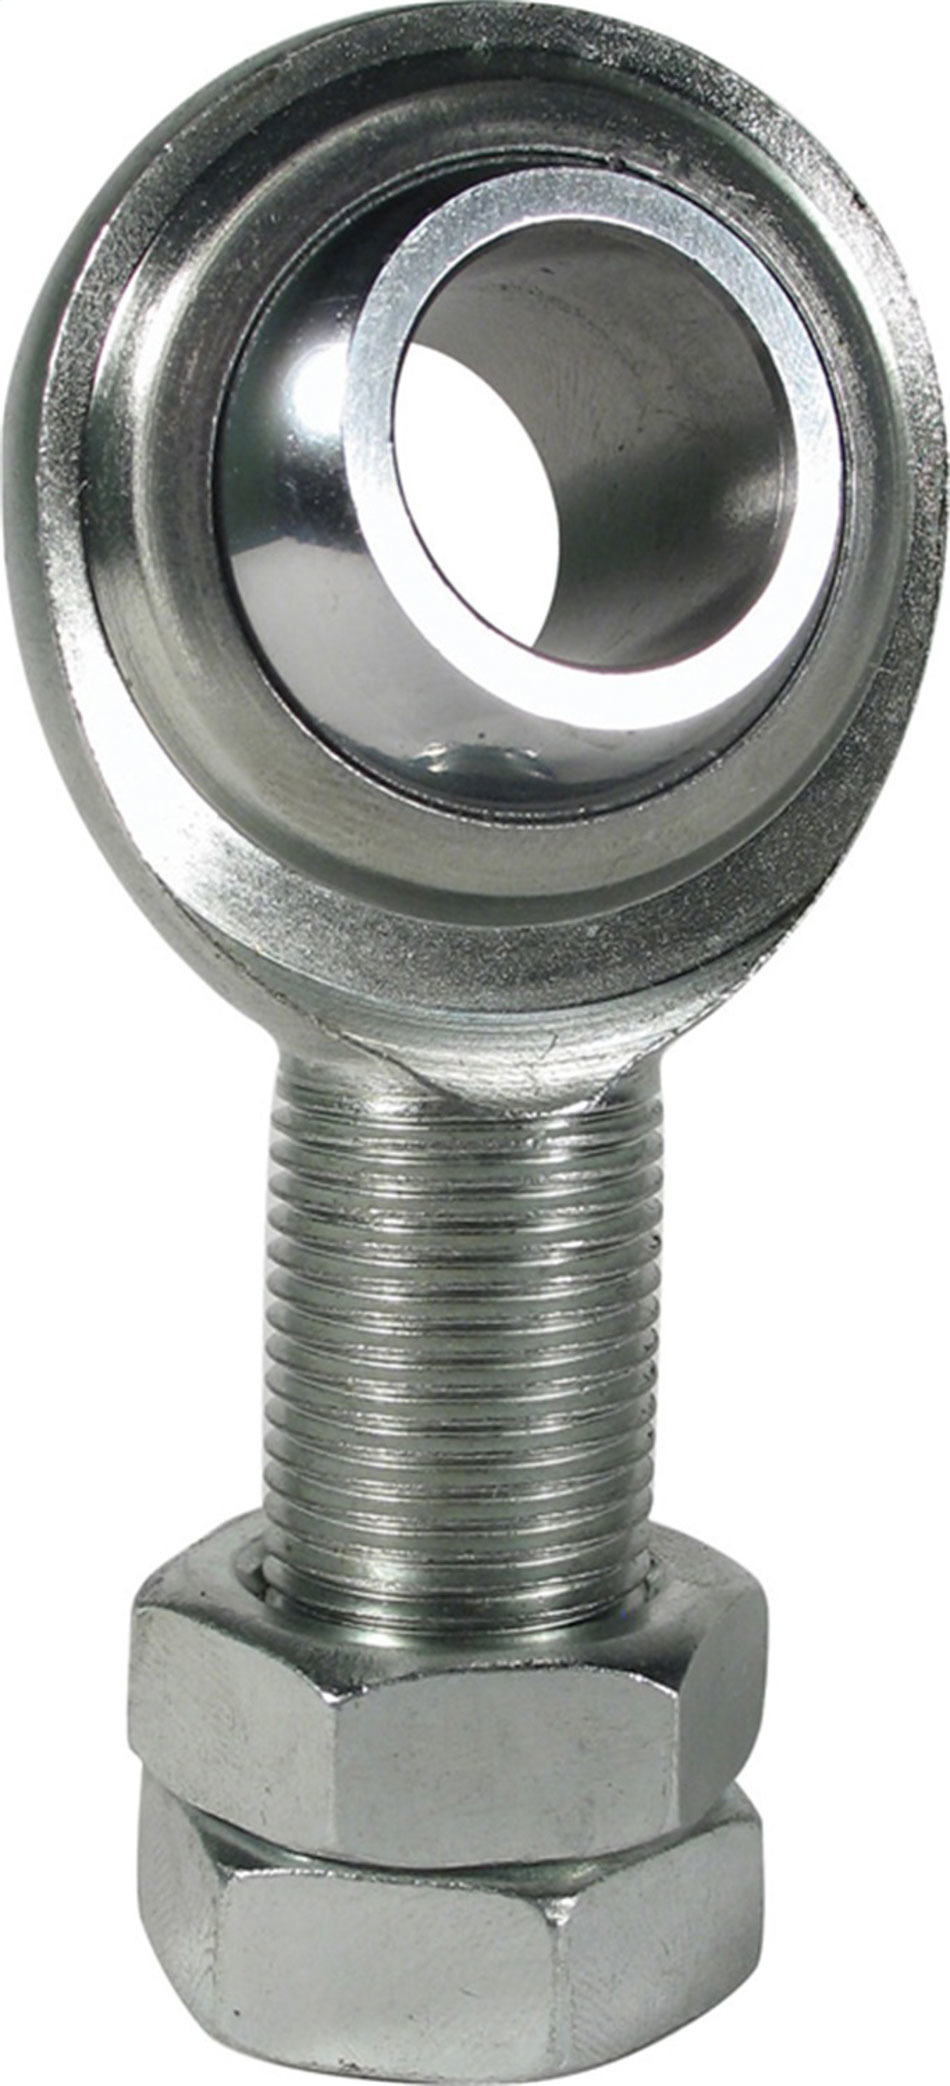 Borgeson 700000 Steering Shaft Support, Spherical Rod End, 3/4-16 in Right Hand Male Thread, Jam Nuts, Steel, Zinc Oxide, 3/4 in Steering Shaft Support, Kit